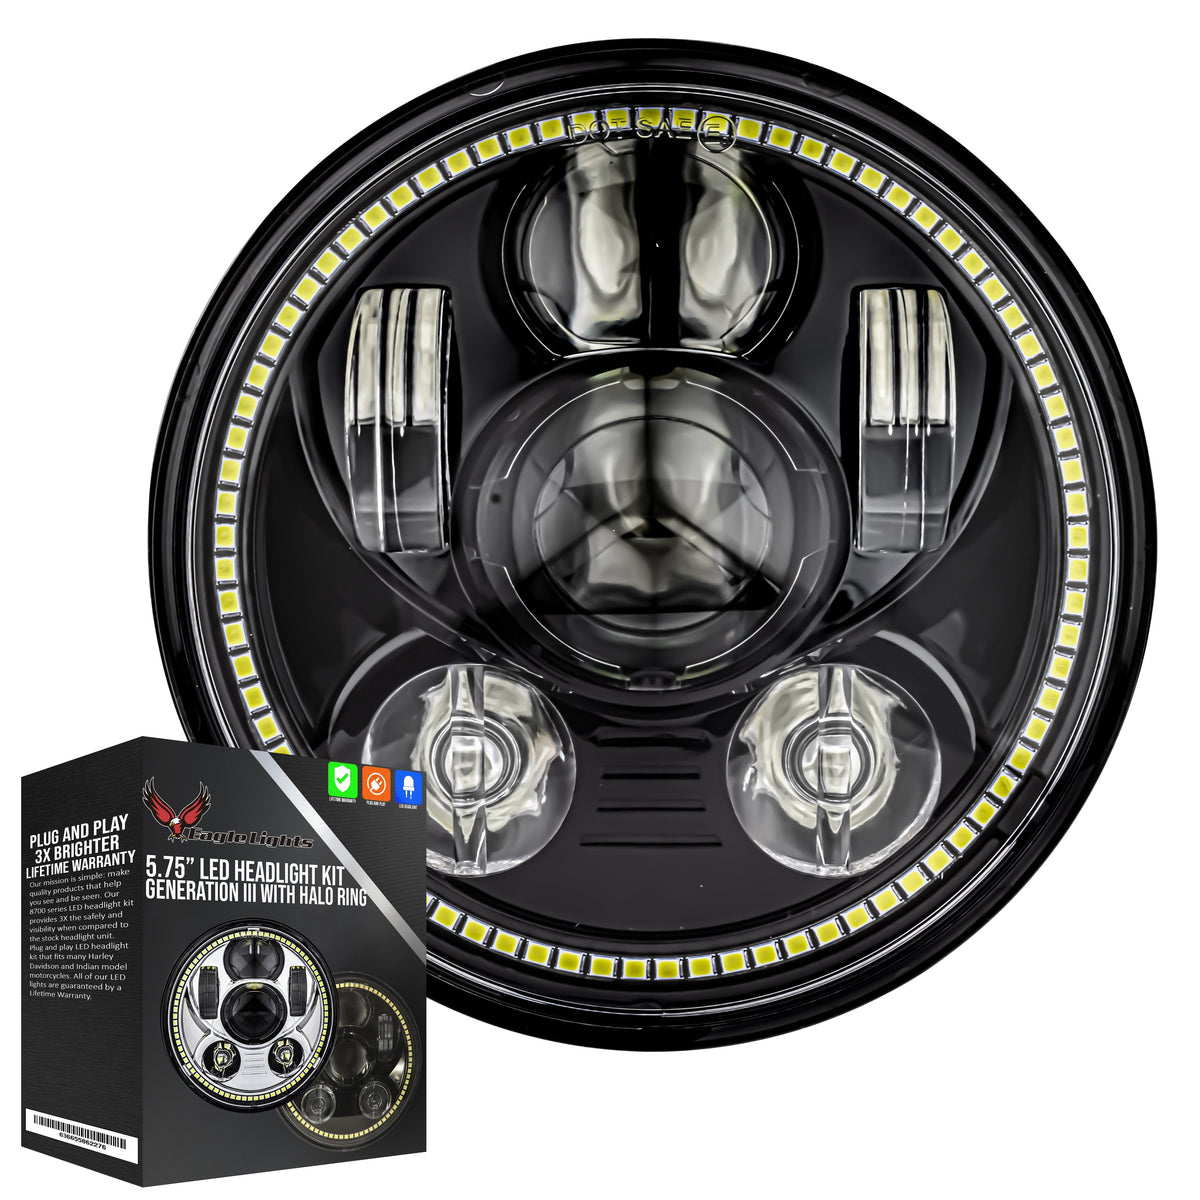 Eagle Lights 5 3/4" LED Headlight with Halo Ring for 2010 - Current Honda Fury, Sabre, Stateline, and Interstate VT1300 Models